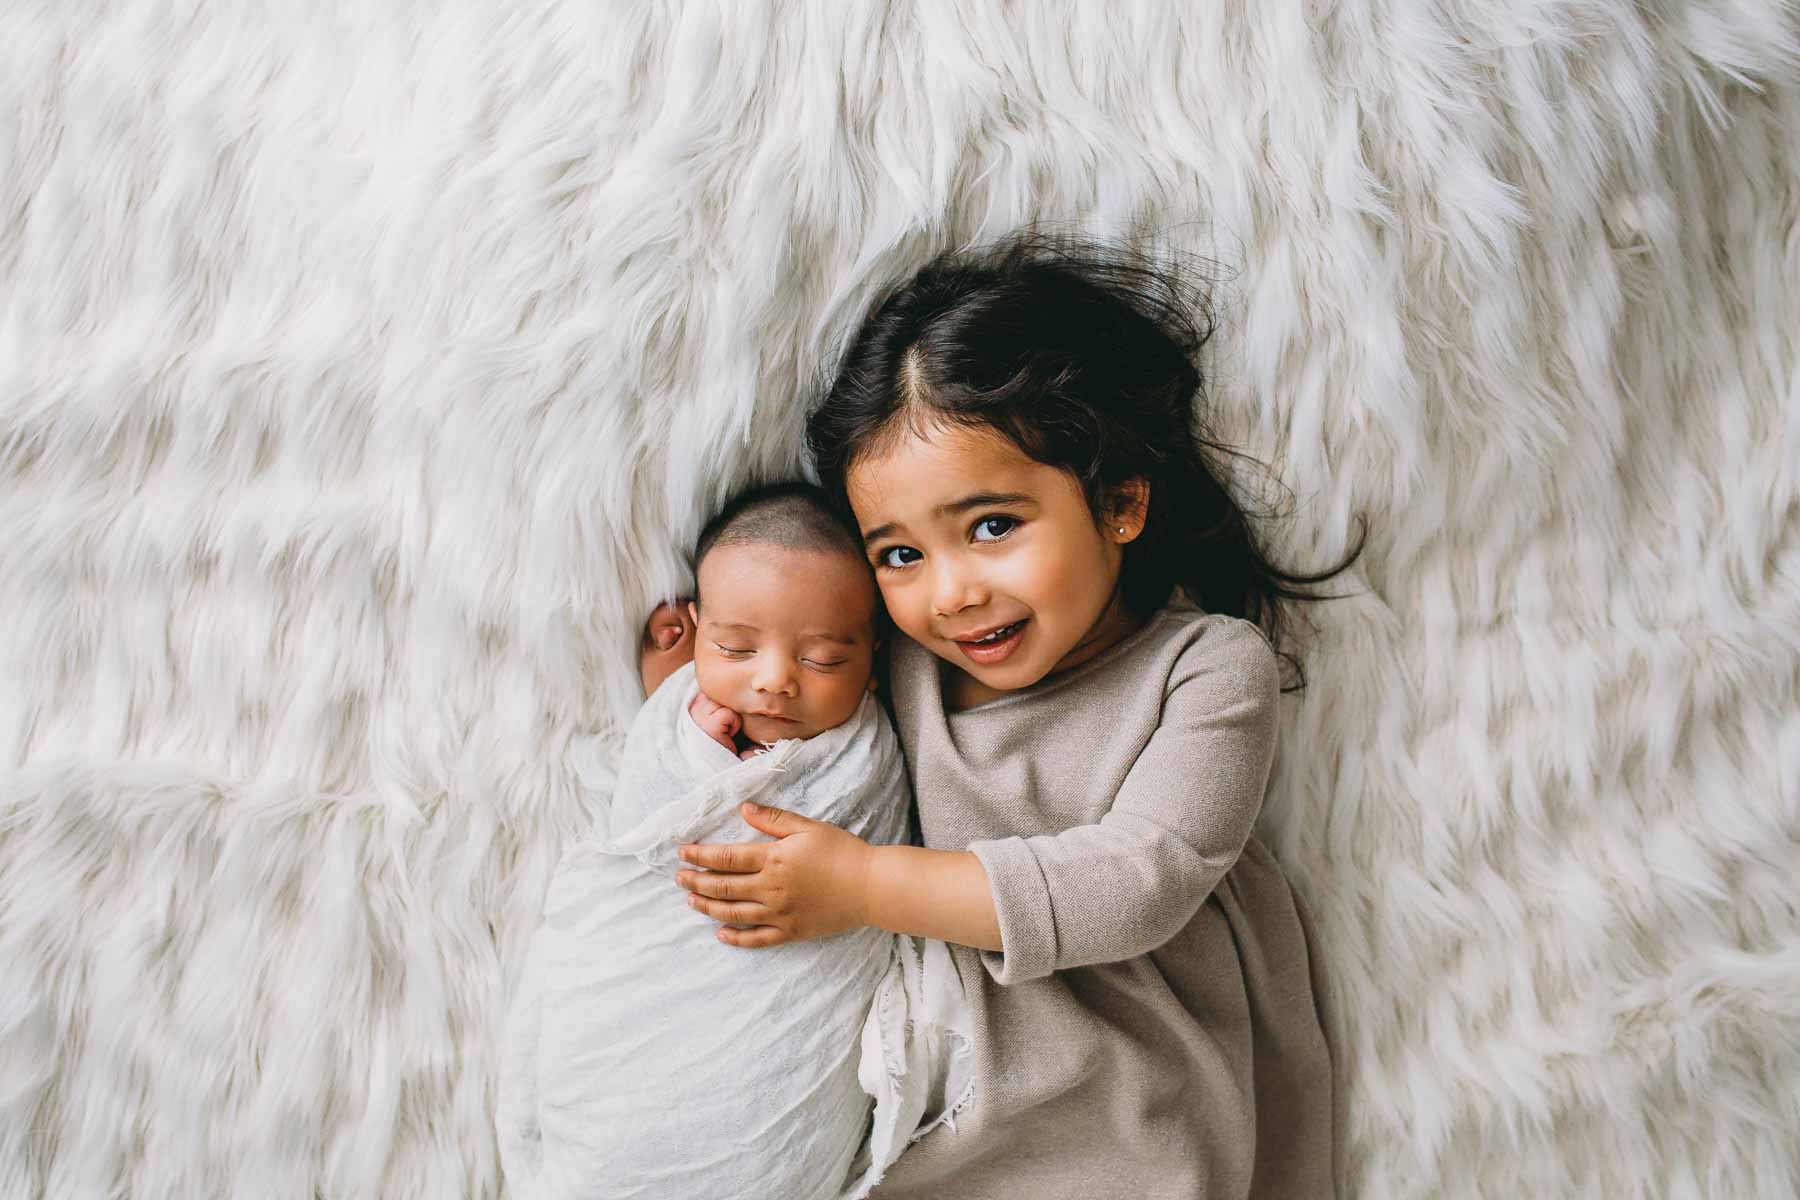 A little girl cradles her newborn baby brother in her arm, laying on a white rug